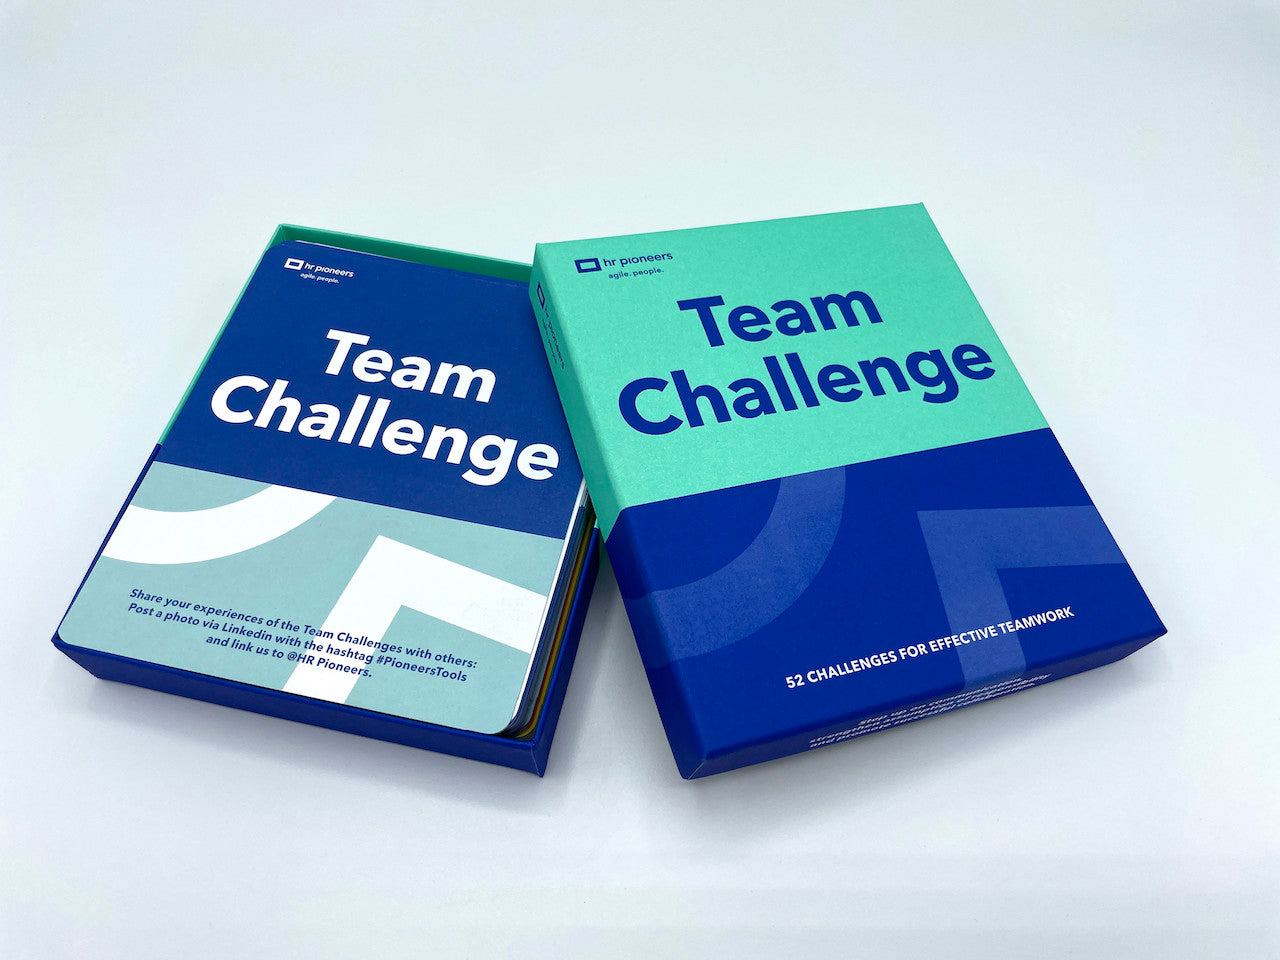 Team Challenge: 52 challenges for effective cooperation